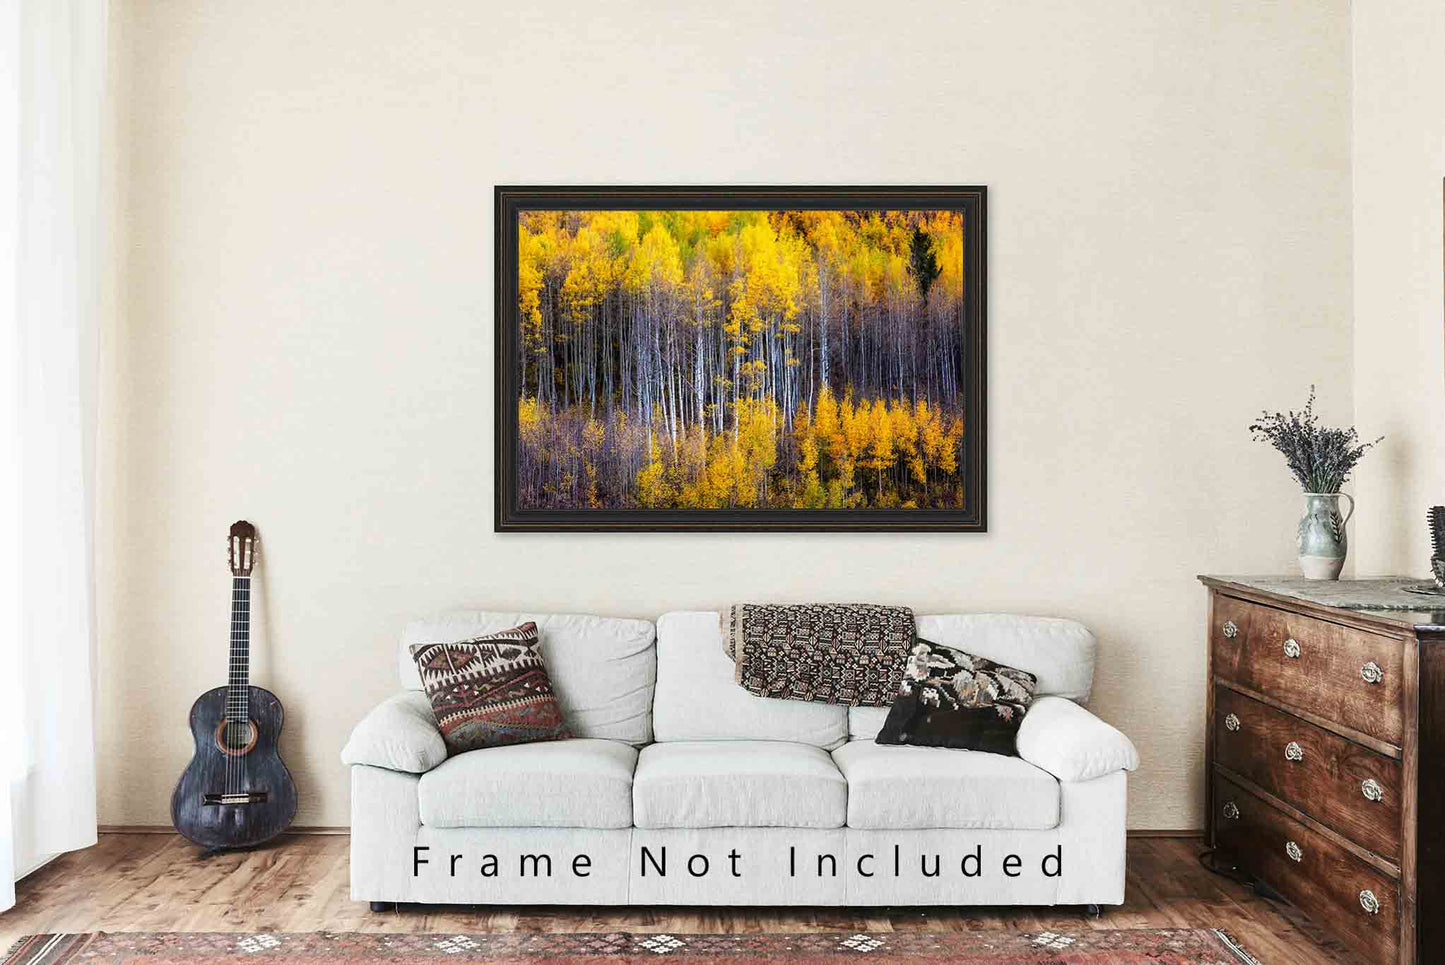 Fall Season Photography Art Print - Picture of Aspen Trees at Maroon Bells Western Colorado Autumn Forest Decor 4x6 to 30x45